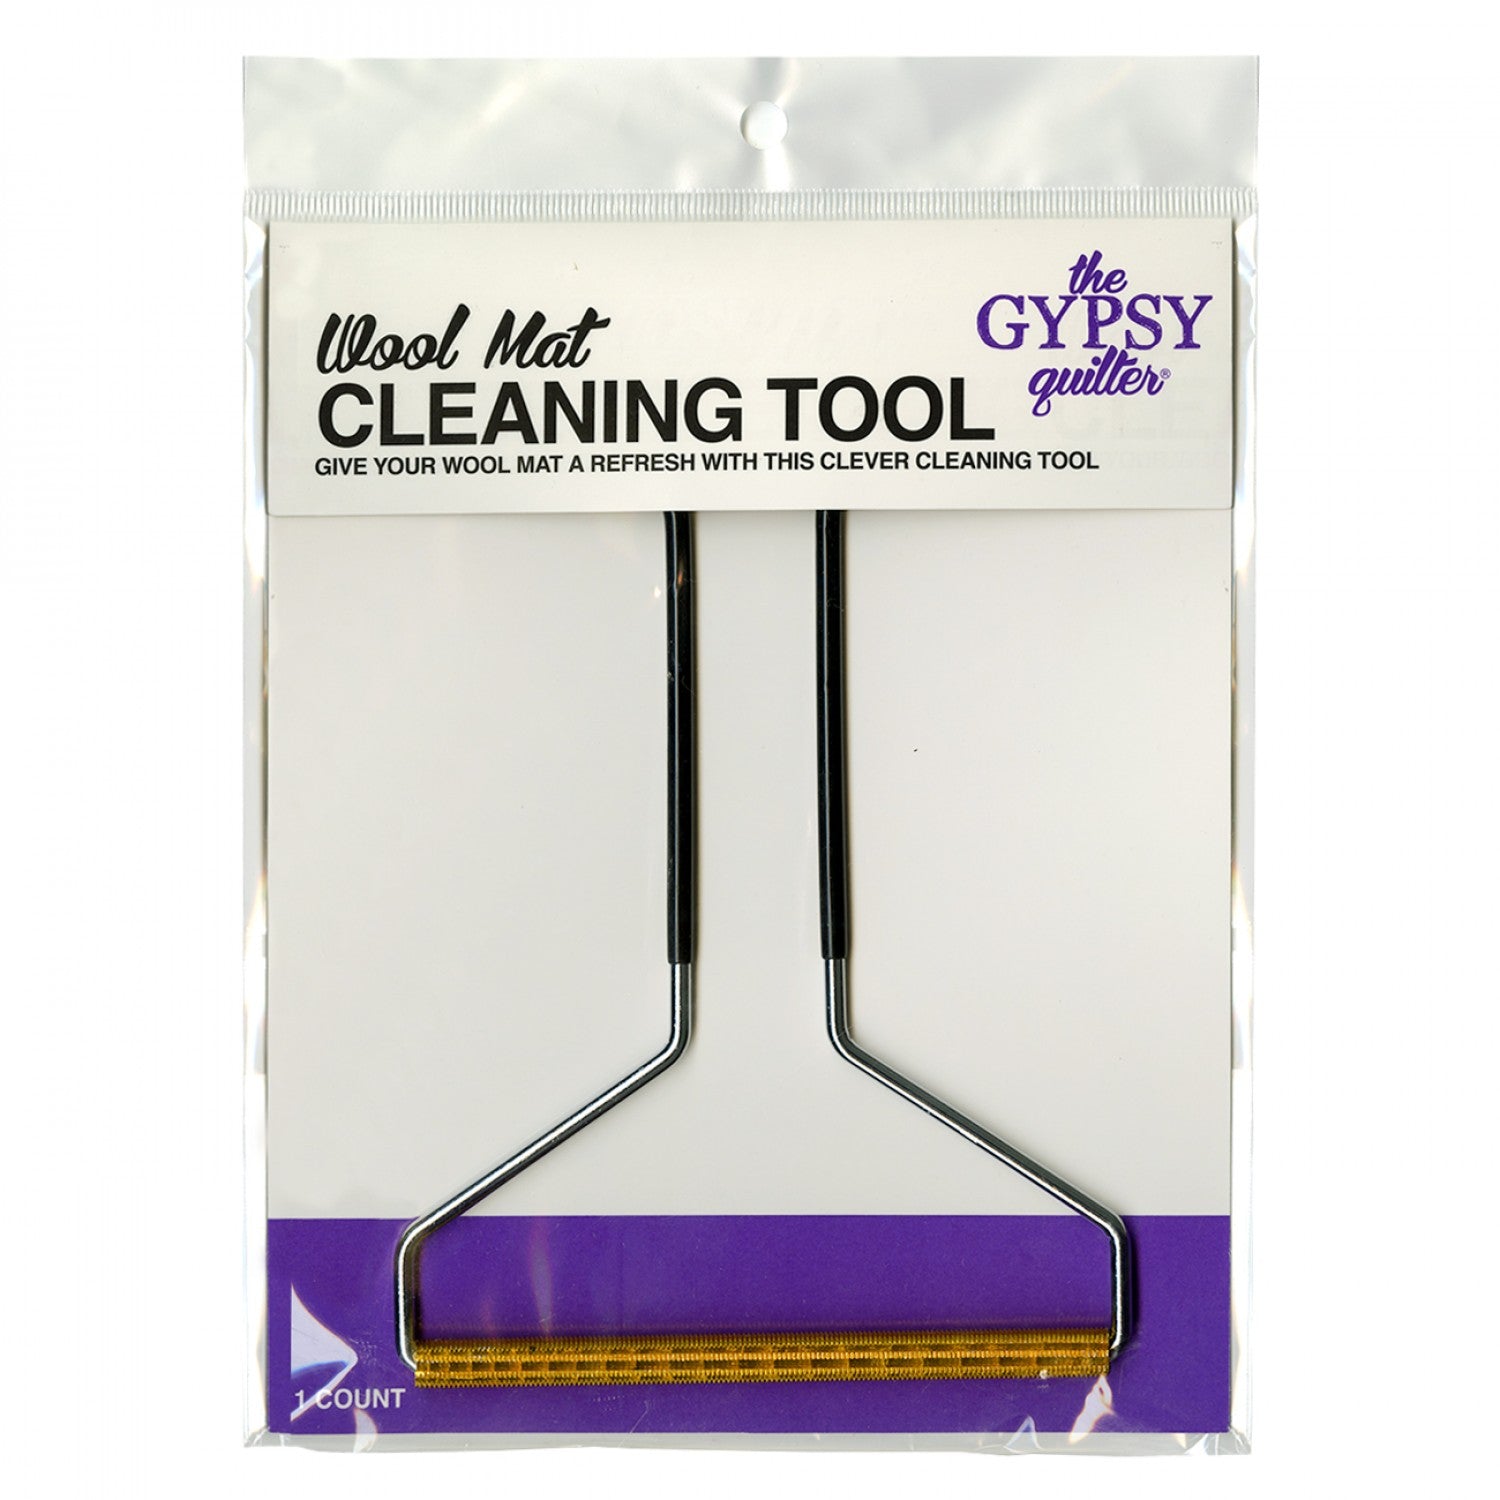 Wool Mat Cleaning Tool from The Gypsy Quilter